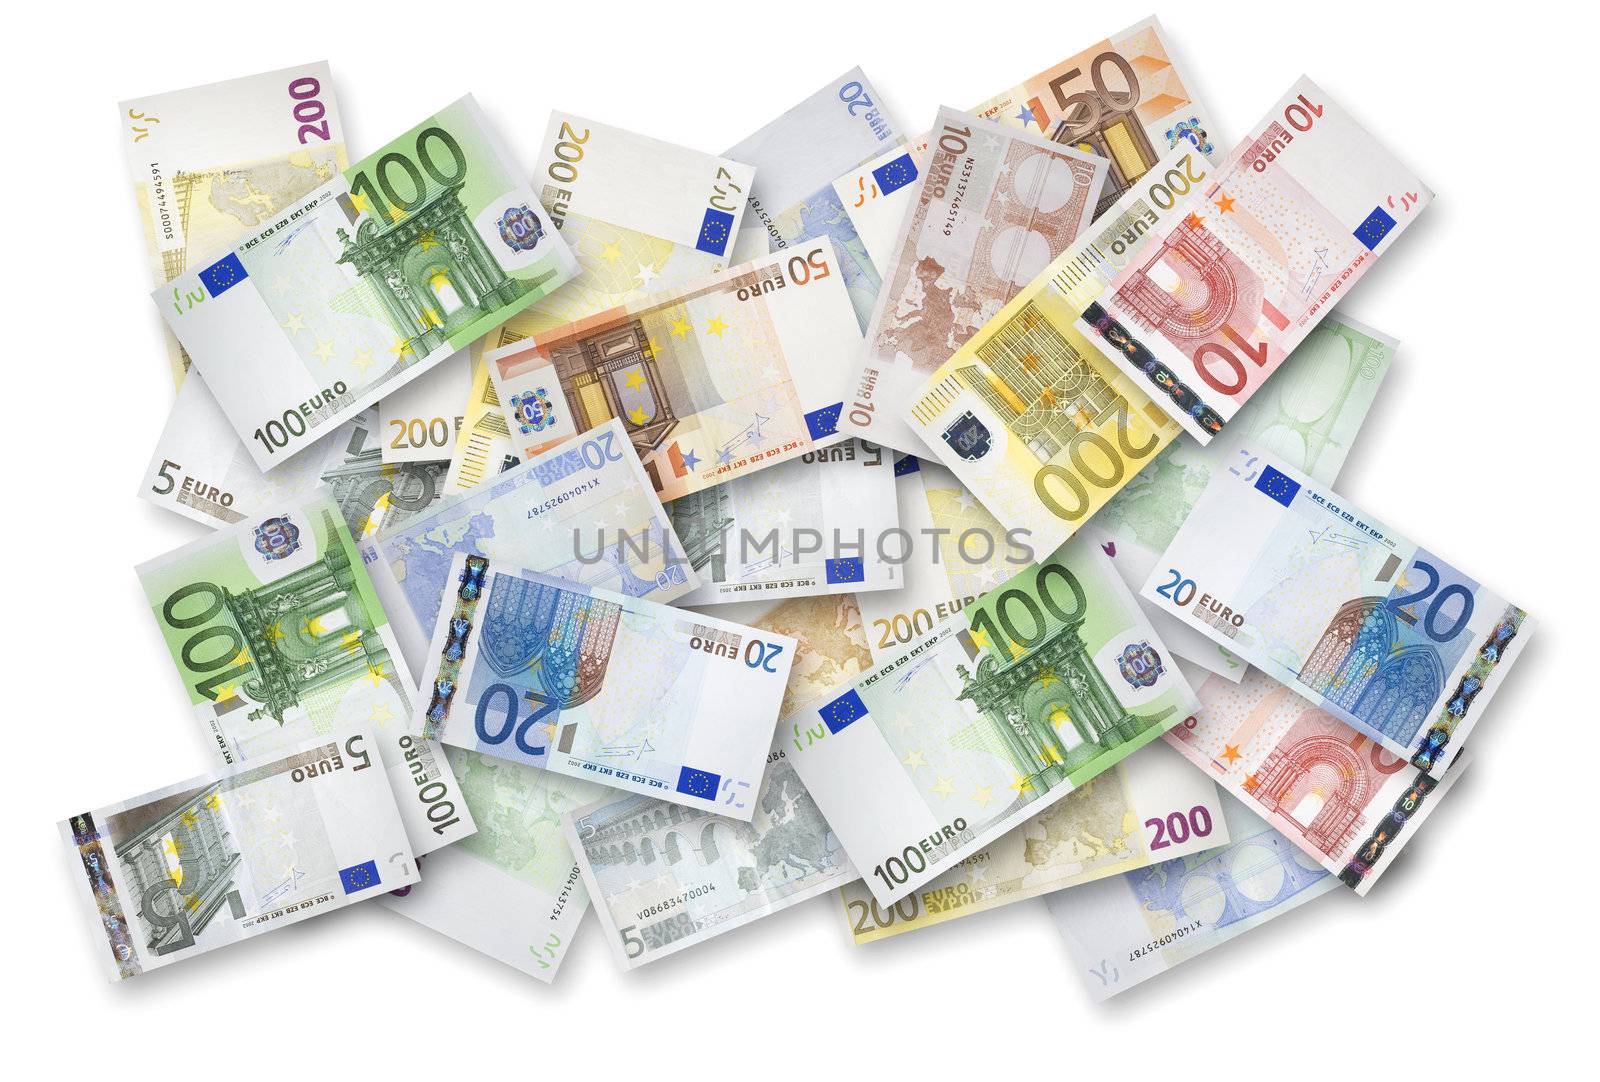 Euro banknotes of 200, 100, 50, 20, 10 and 5 Euroes spread randomly on a table.